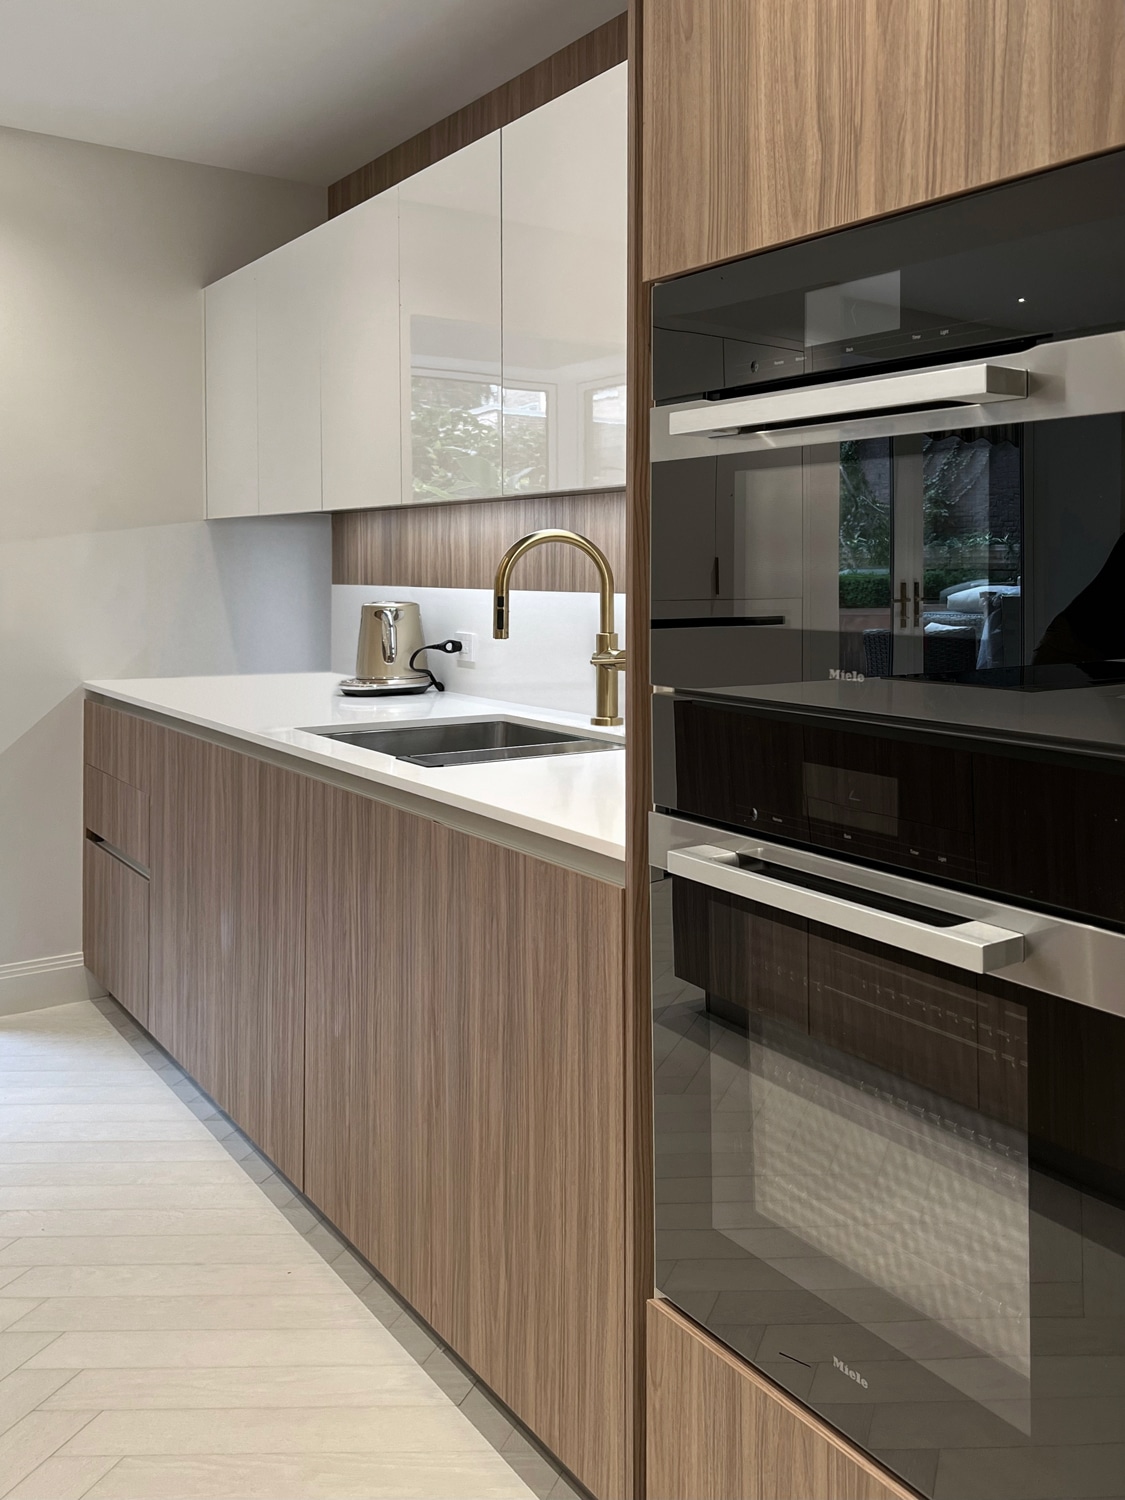 New York, New York. Here we see Omicron, Rho & Kappa kitchen cabinetry in Noce Carmel & White Gloss finishes. Appliances are Miele & Sub Zero. Renovated Home, NY, the Project Designer worked in collaboration with Lorena Polon, Senior Designer Consultant with the MandiCasa New York showroom.